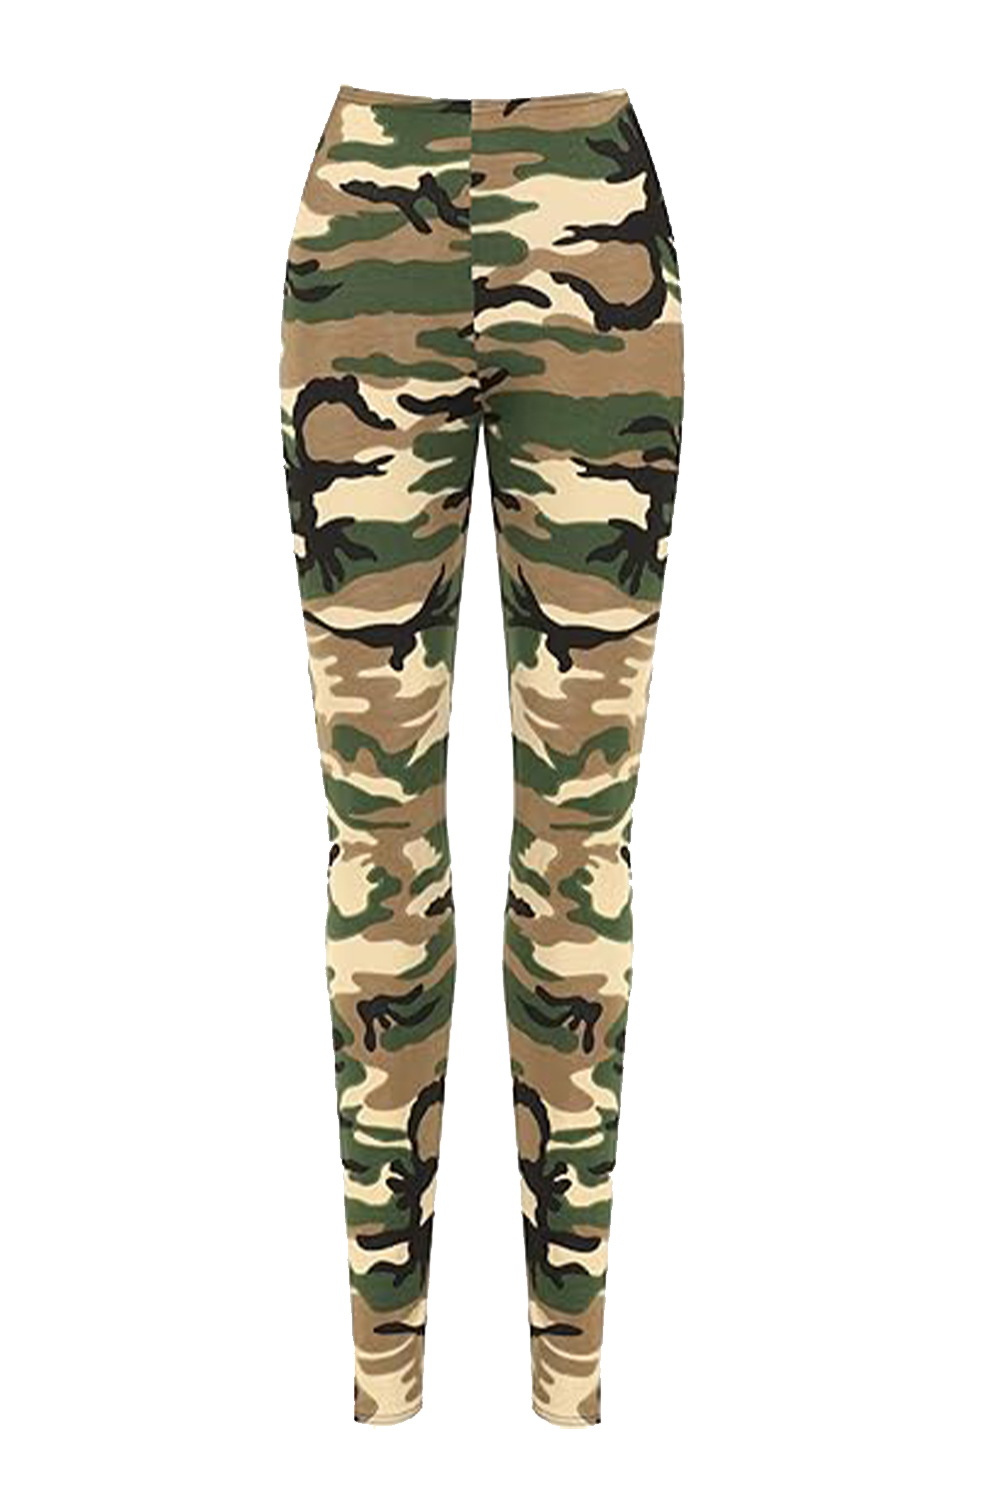 Crazy Chick Adult Cotton Camouflage Leggings